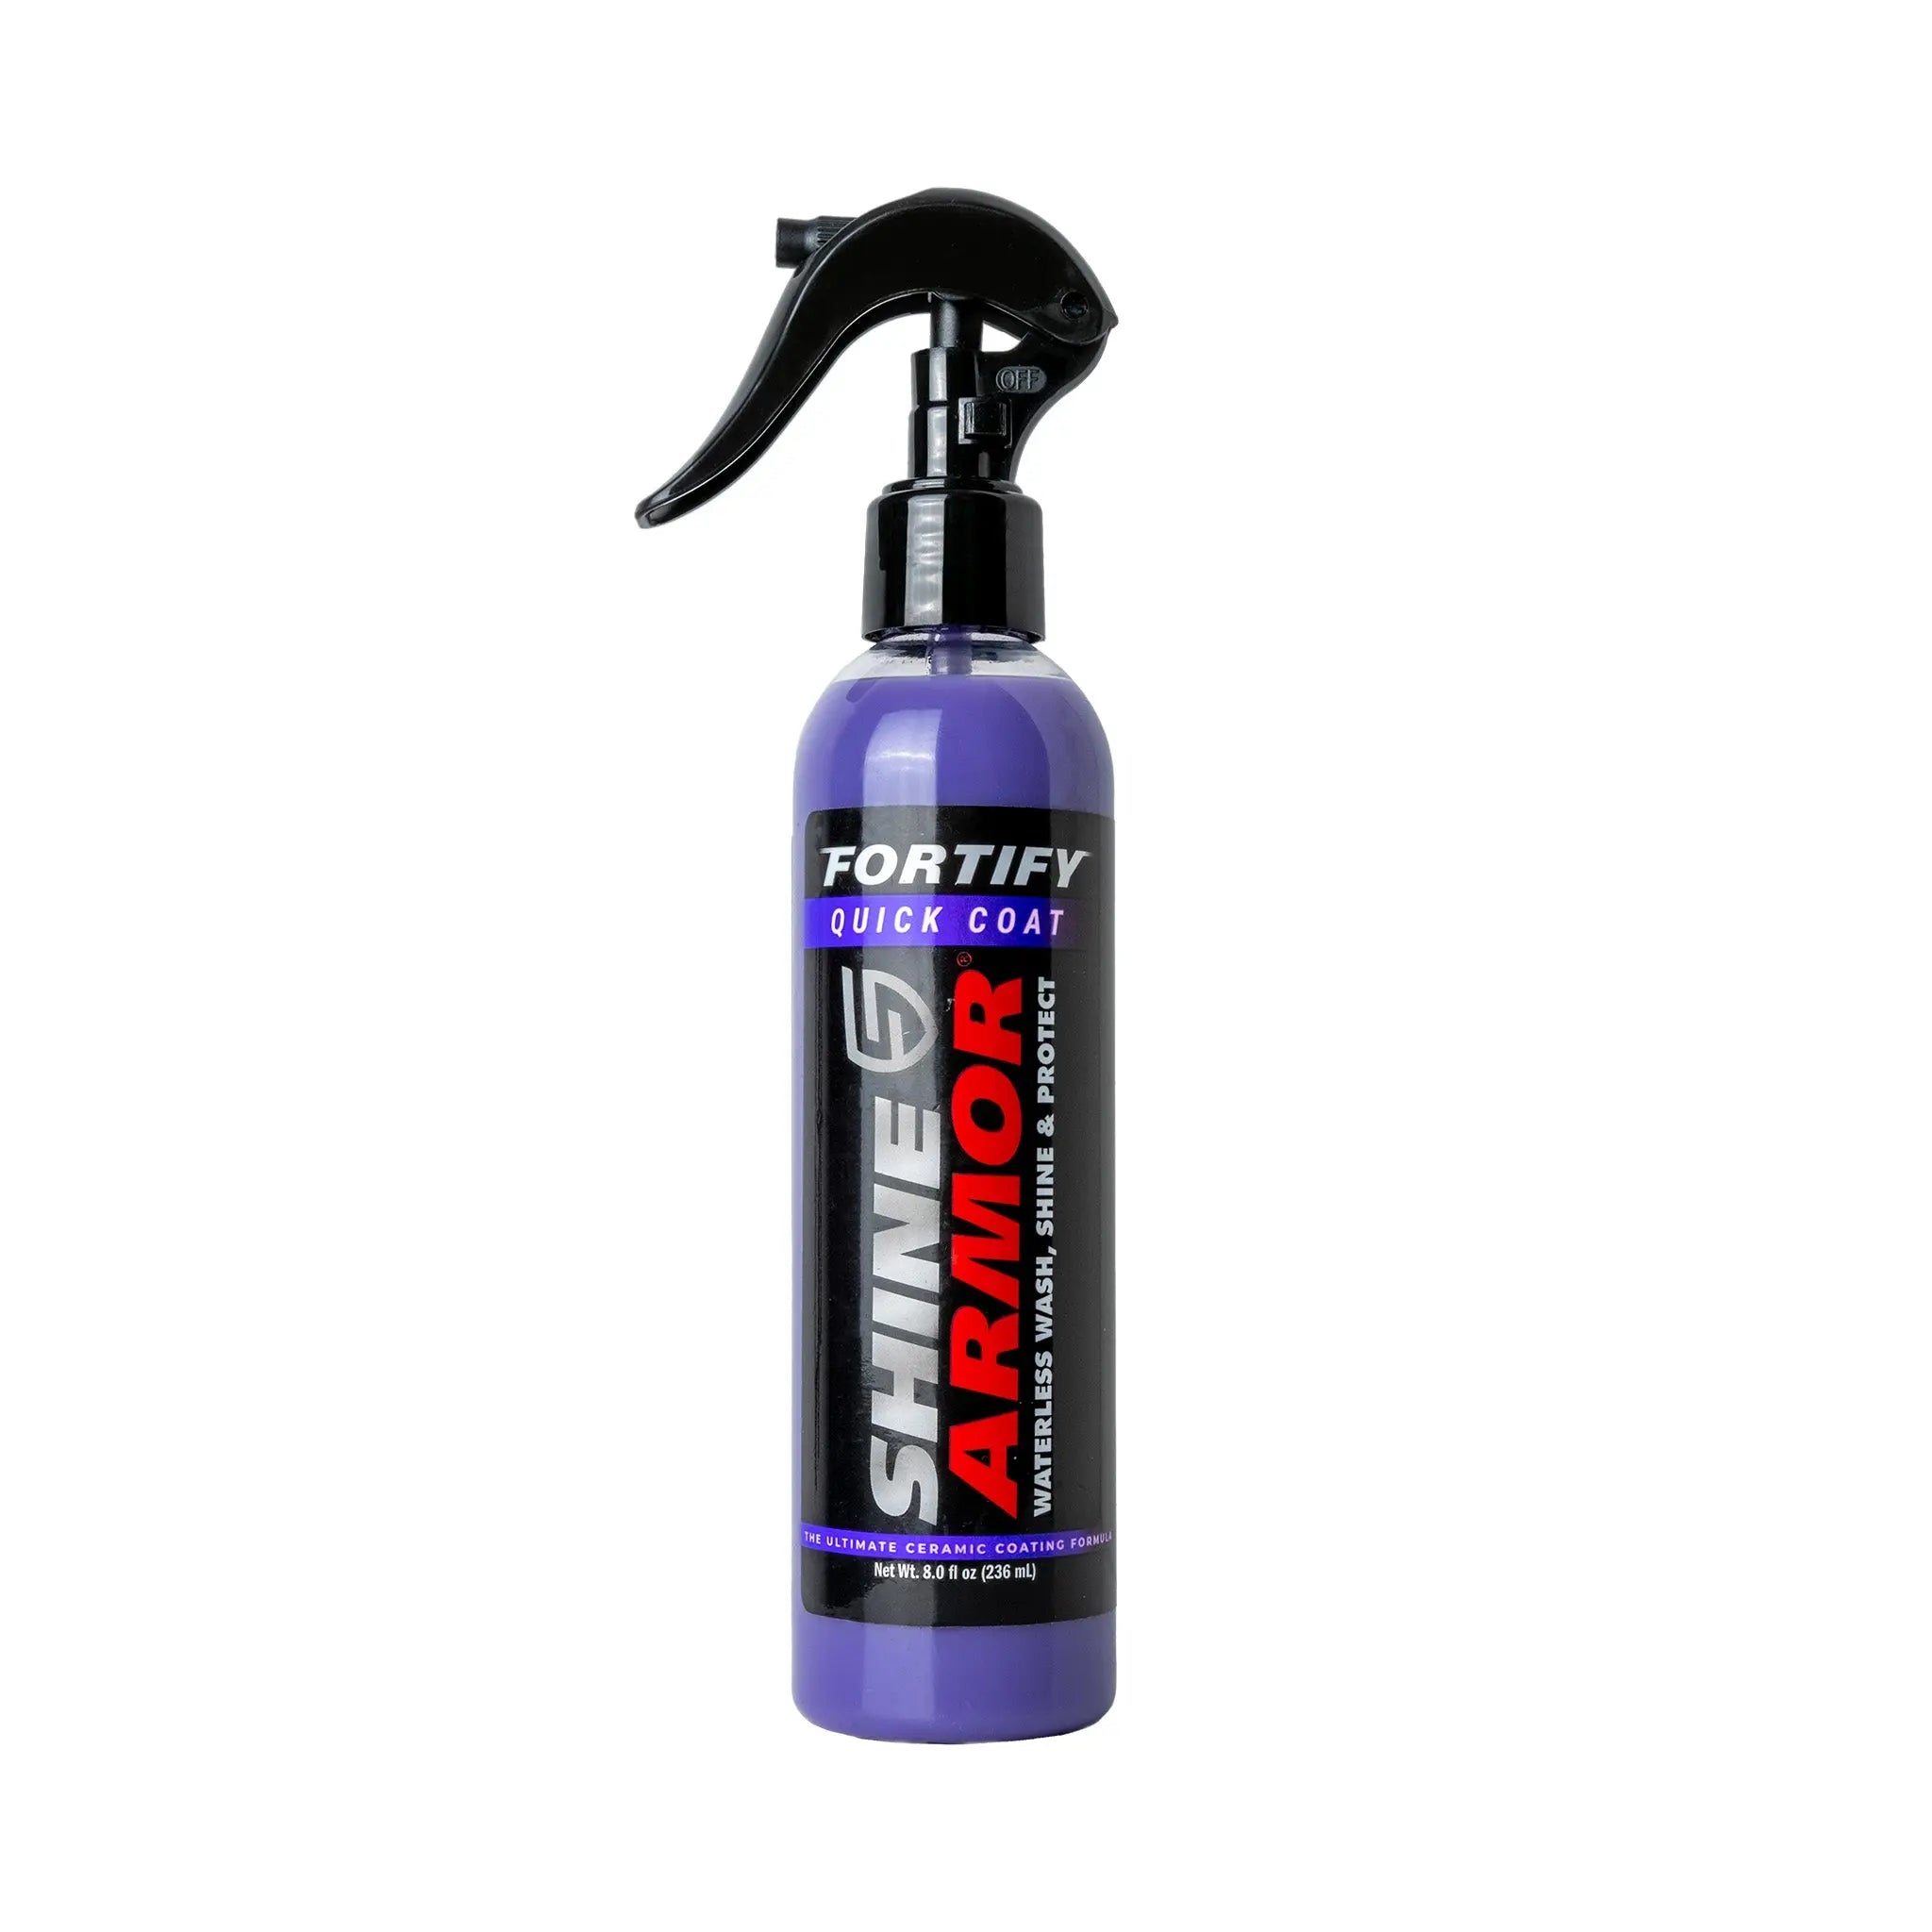 Exterior Detailing Products  The Best Quality Car Care Products – Shine  Armor